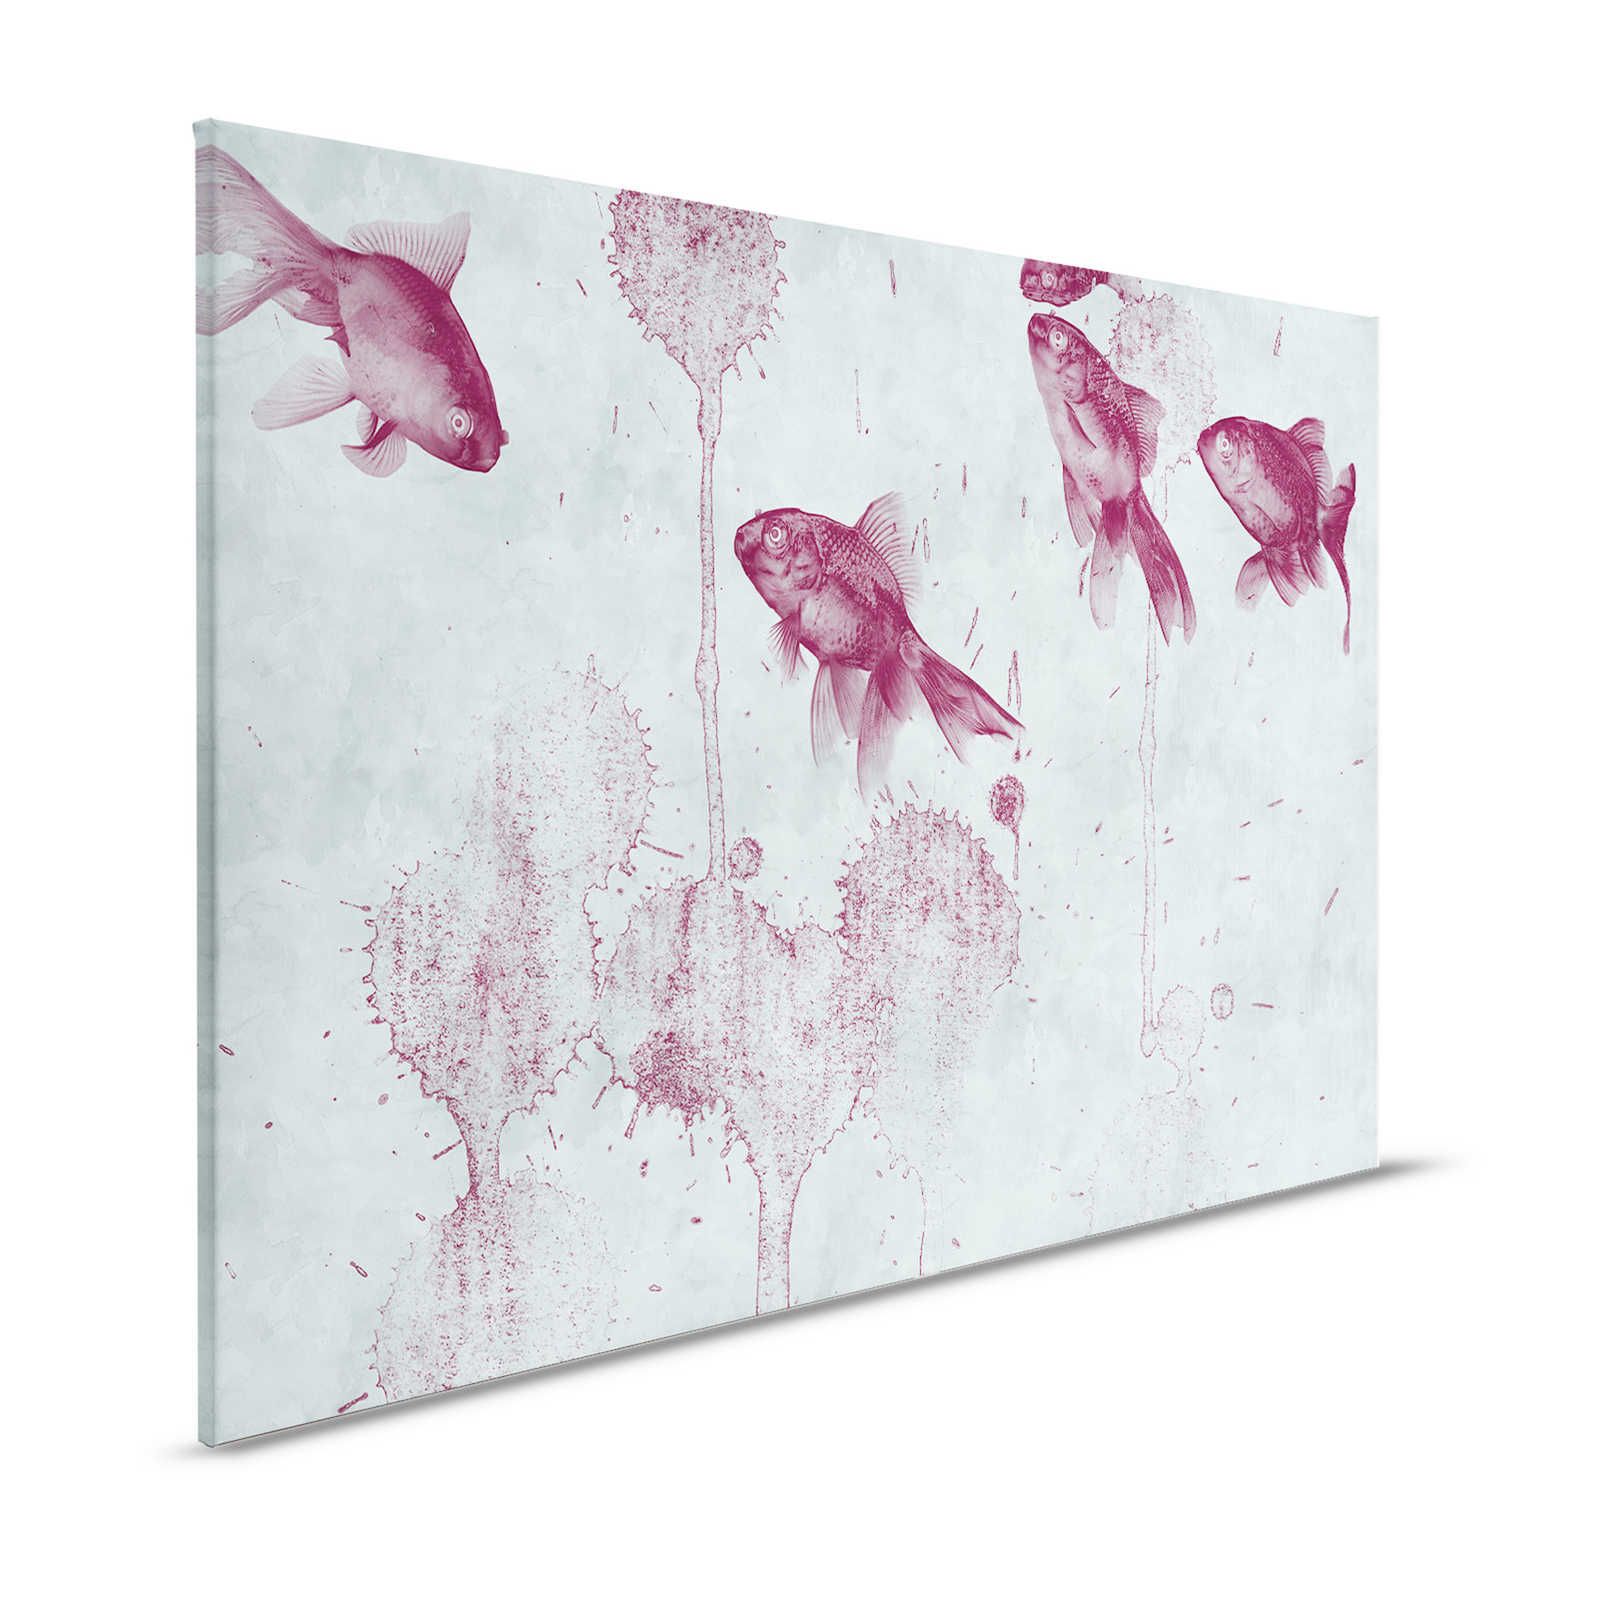 Modern Canvas painting Fish Design in Watercolour Style - 1,20 m x 0,80 m
